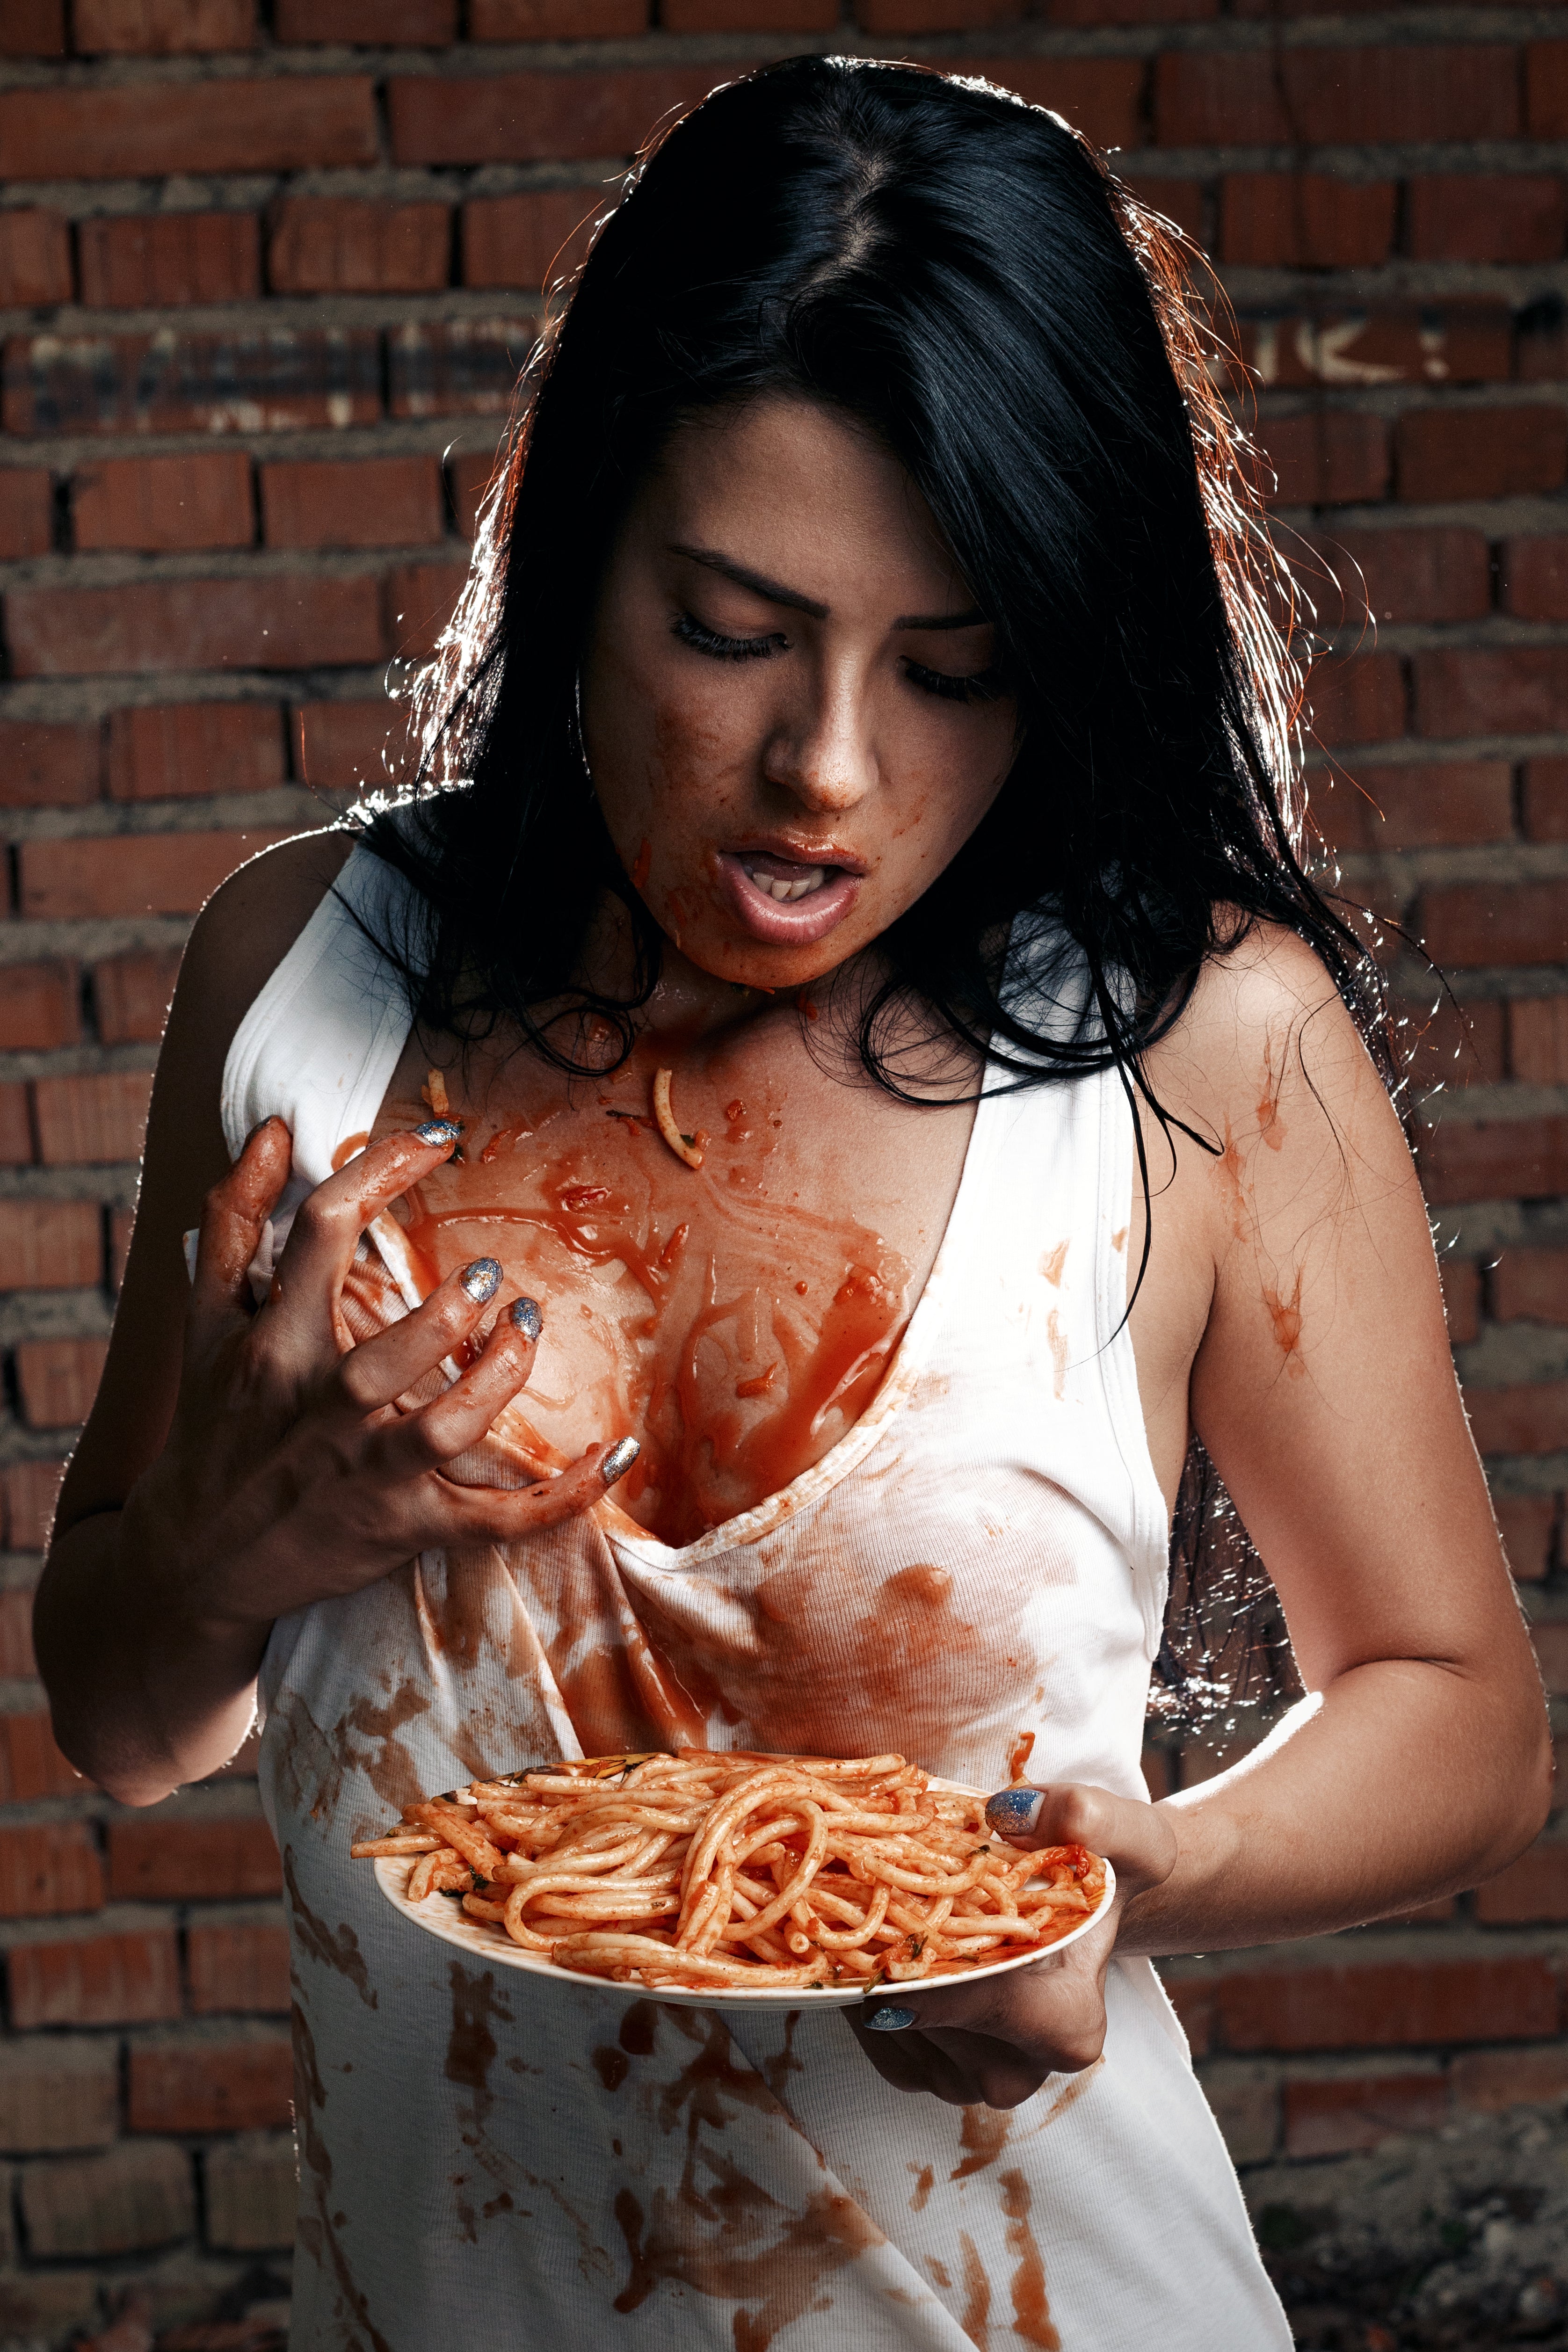 Beautiful Woman Spilling Spaghetti and Sauce All Over Herself!